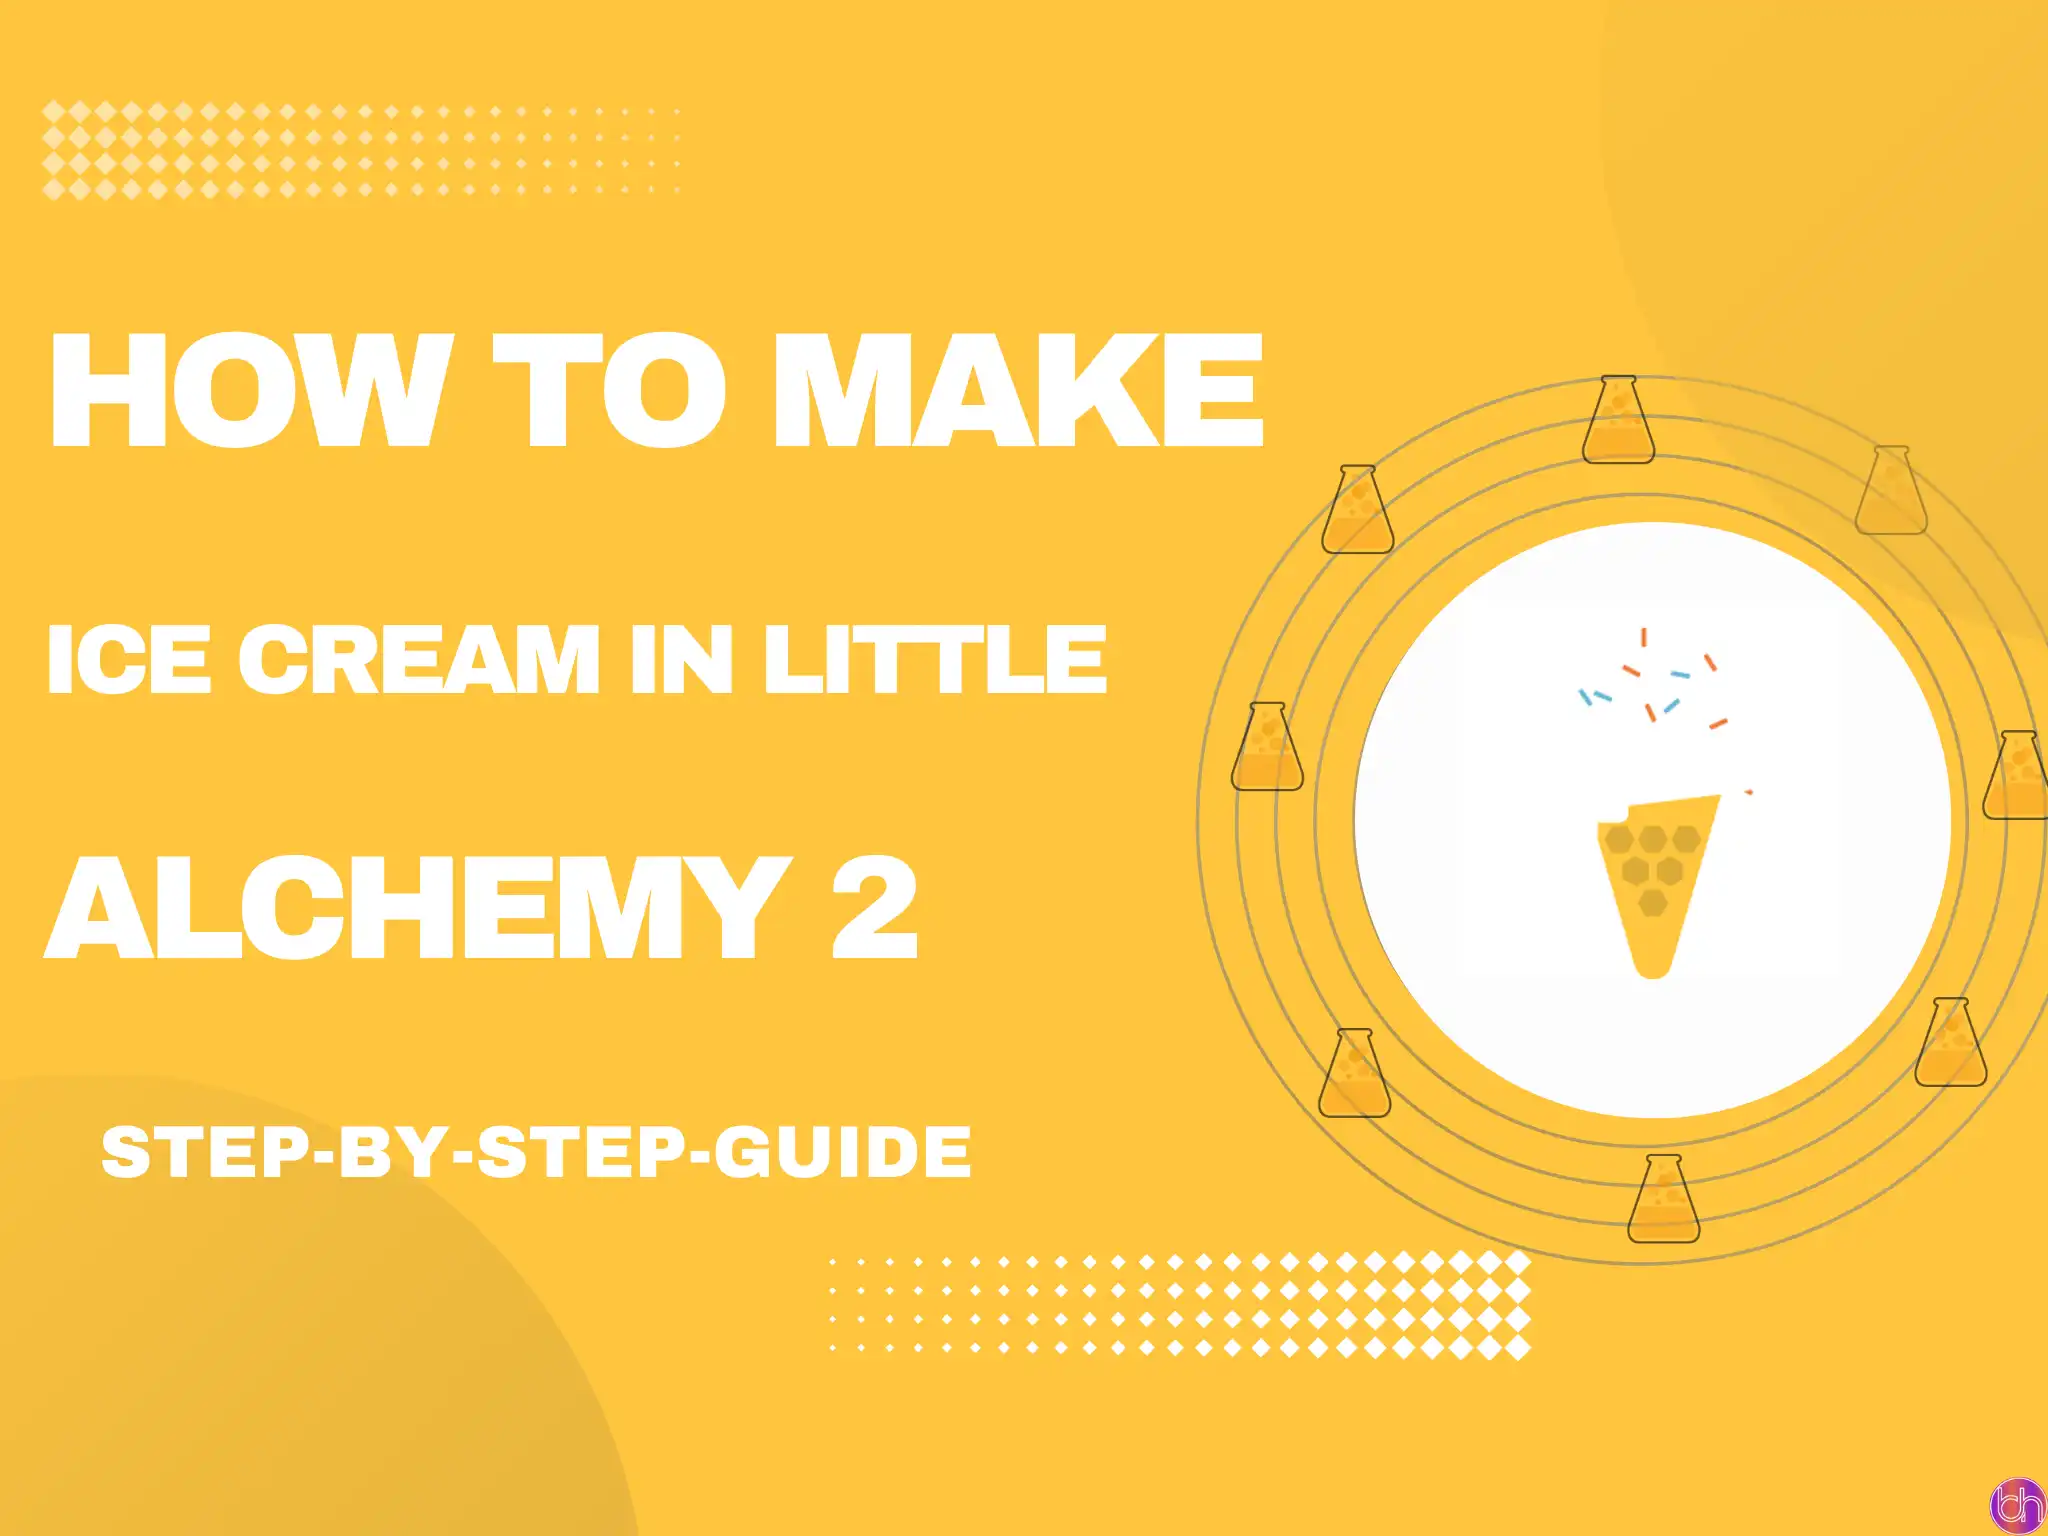 How to make Ice cream in Little Alchemy 2